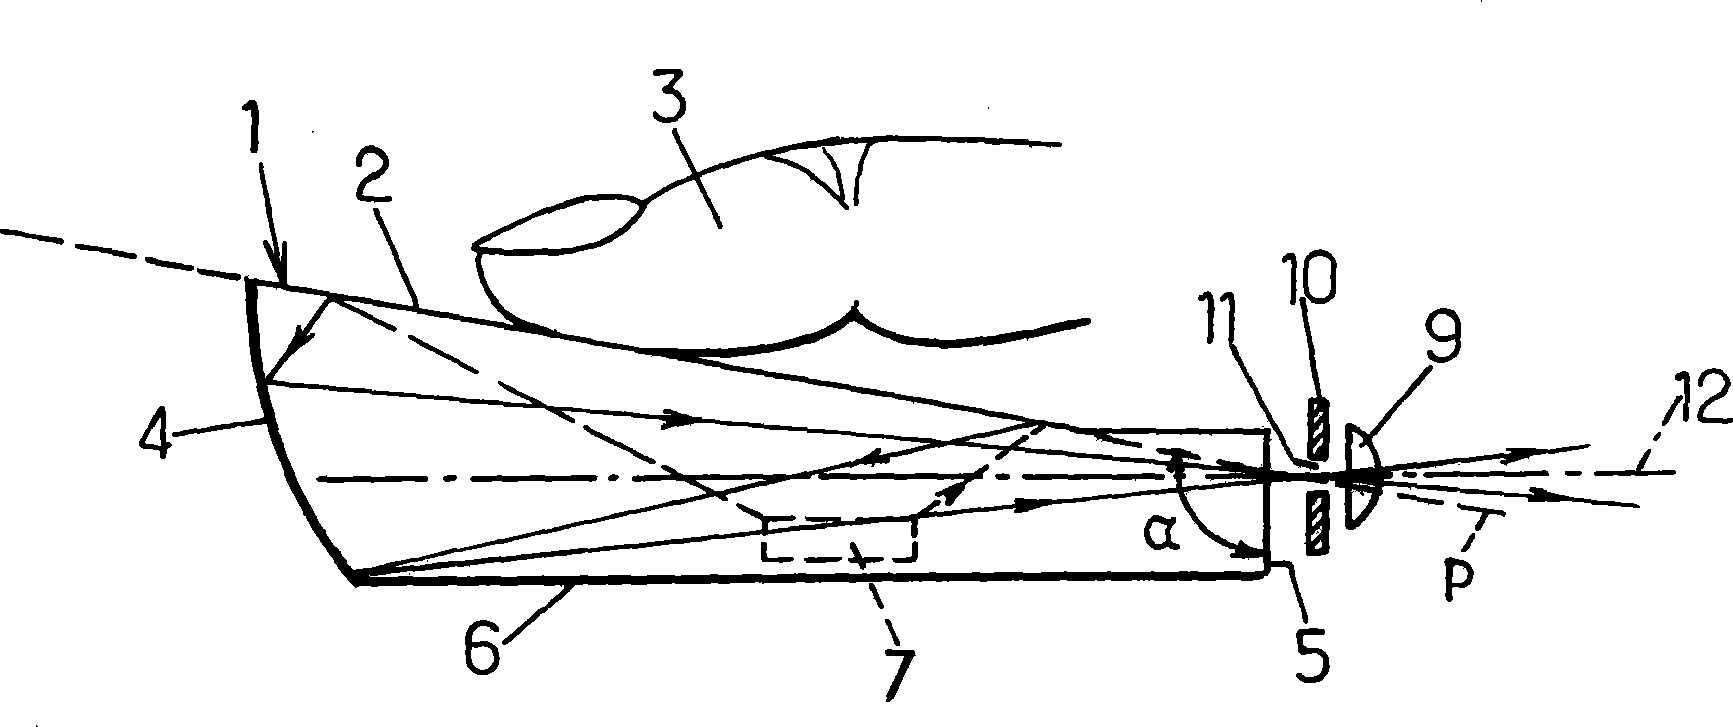 Optical finger print image forming device